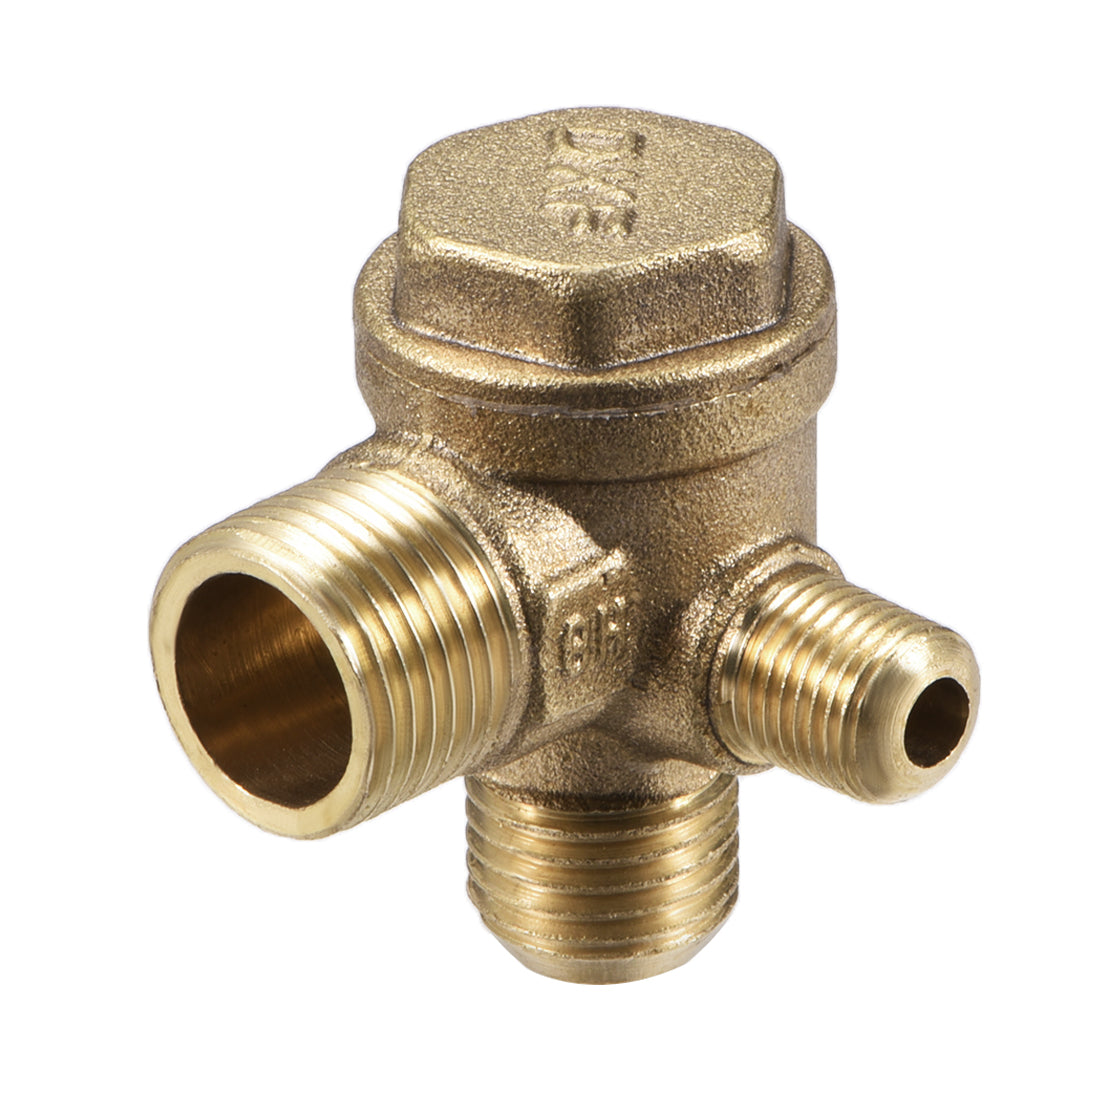 uxcell Uxcell Air Compressor Check Valve 90 Degree Male Threaded Brass M10xM14xPT3/8